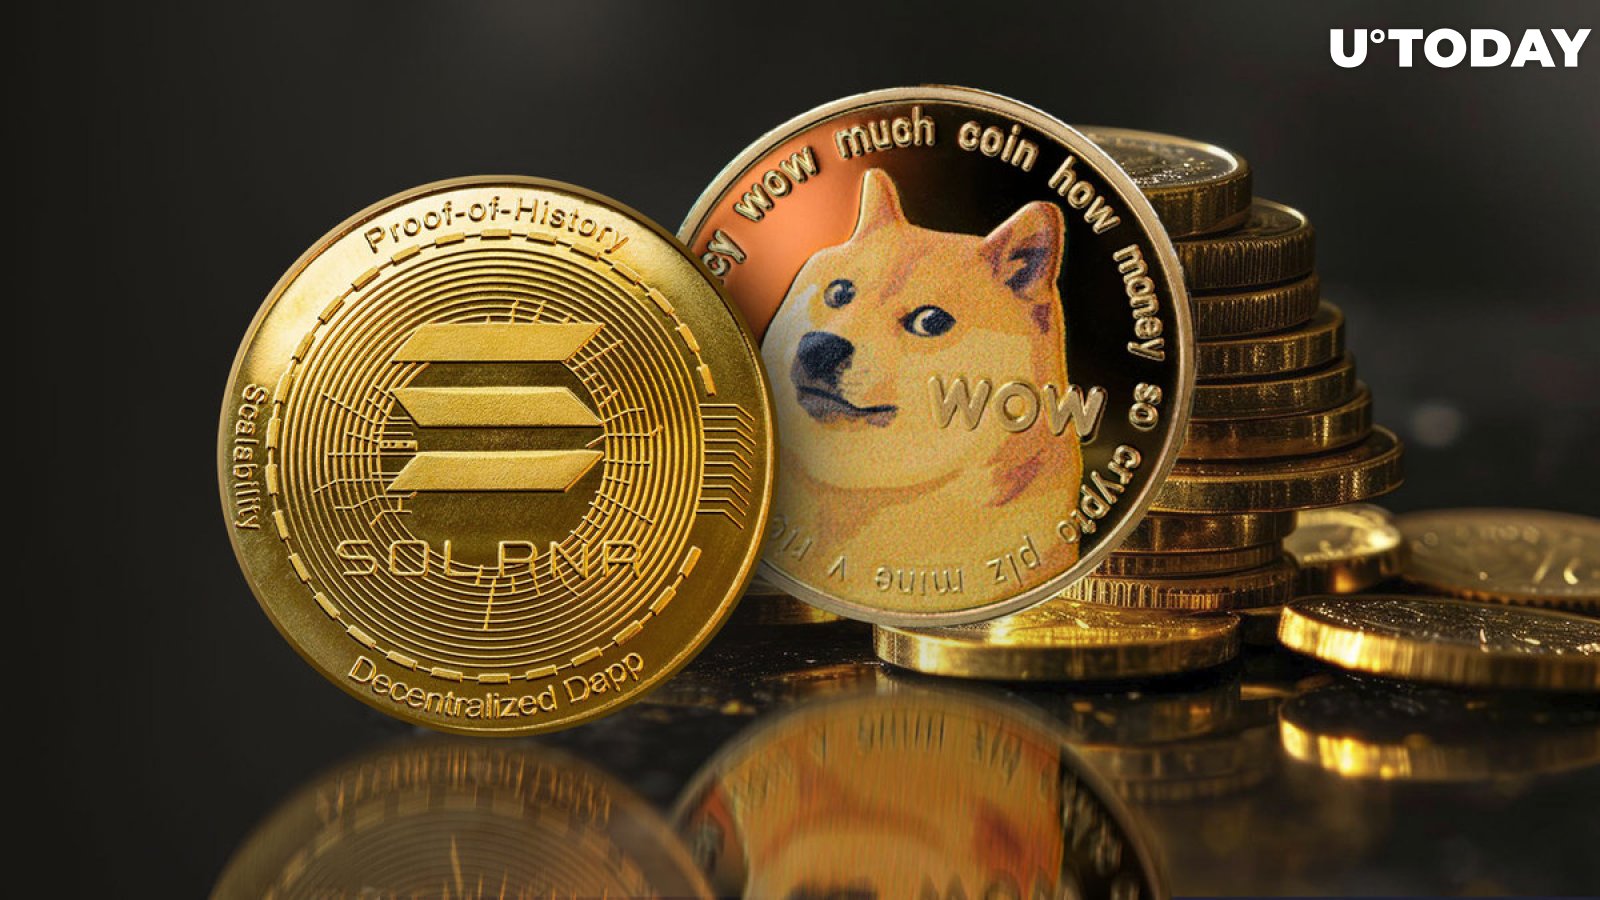 Dogecoin Only: DOGE Creator Denies Ties to Cat-Inspired Solana Meme Coin